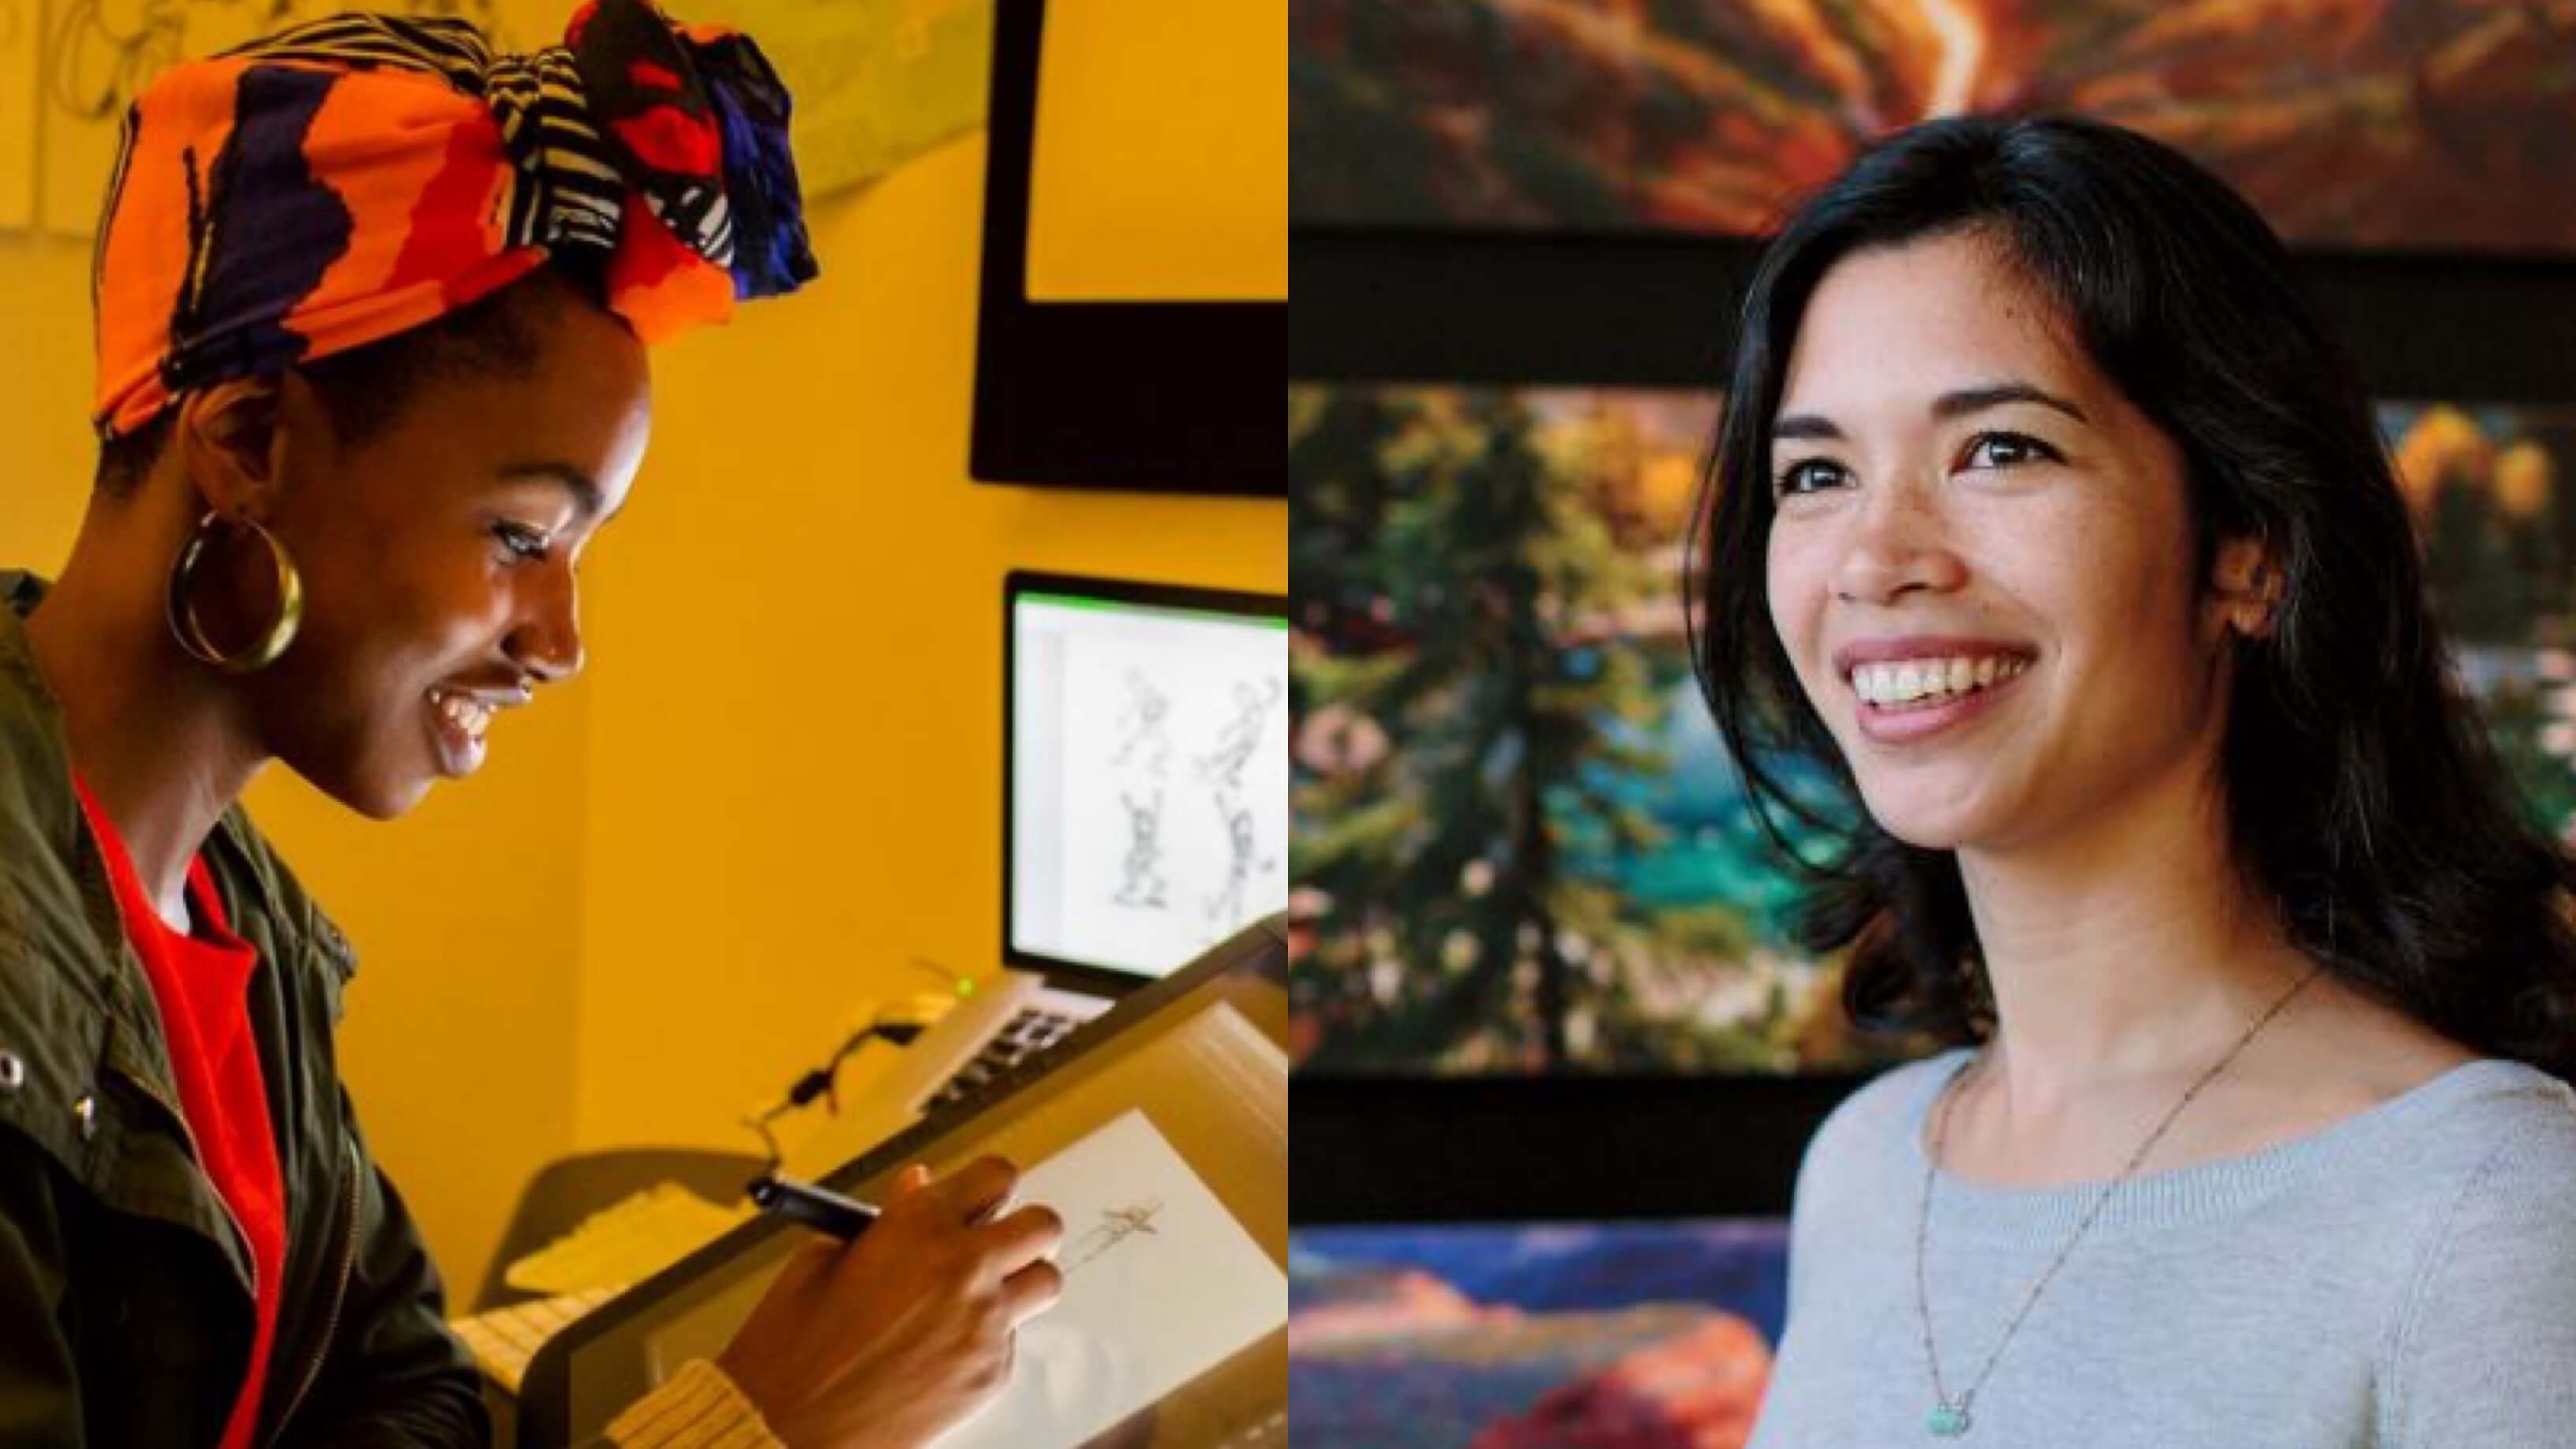 Aphton Corbin and Rosana Sullivan Developing and Will Direct New Feature Films at Pixar